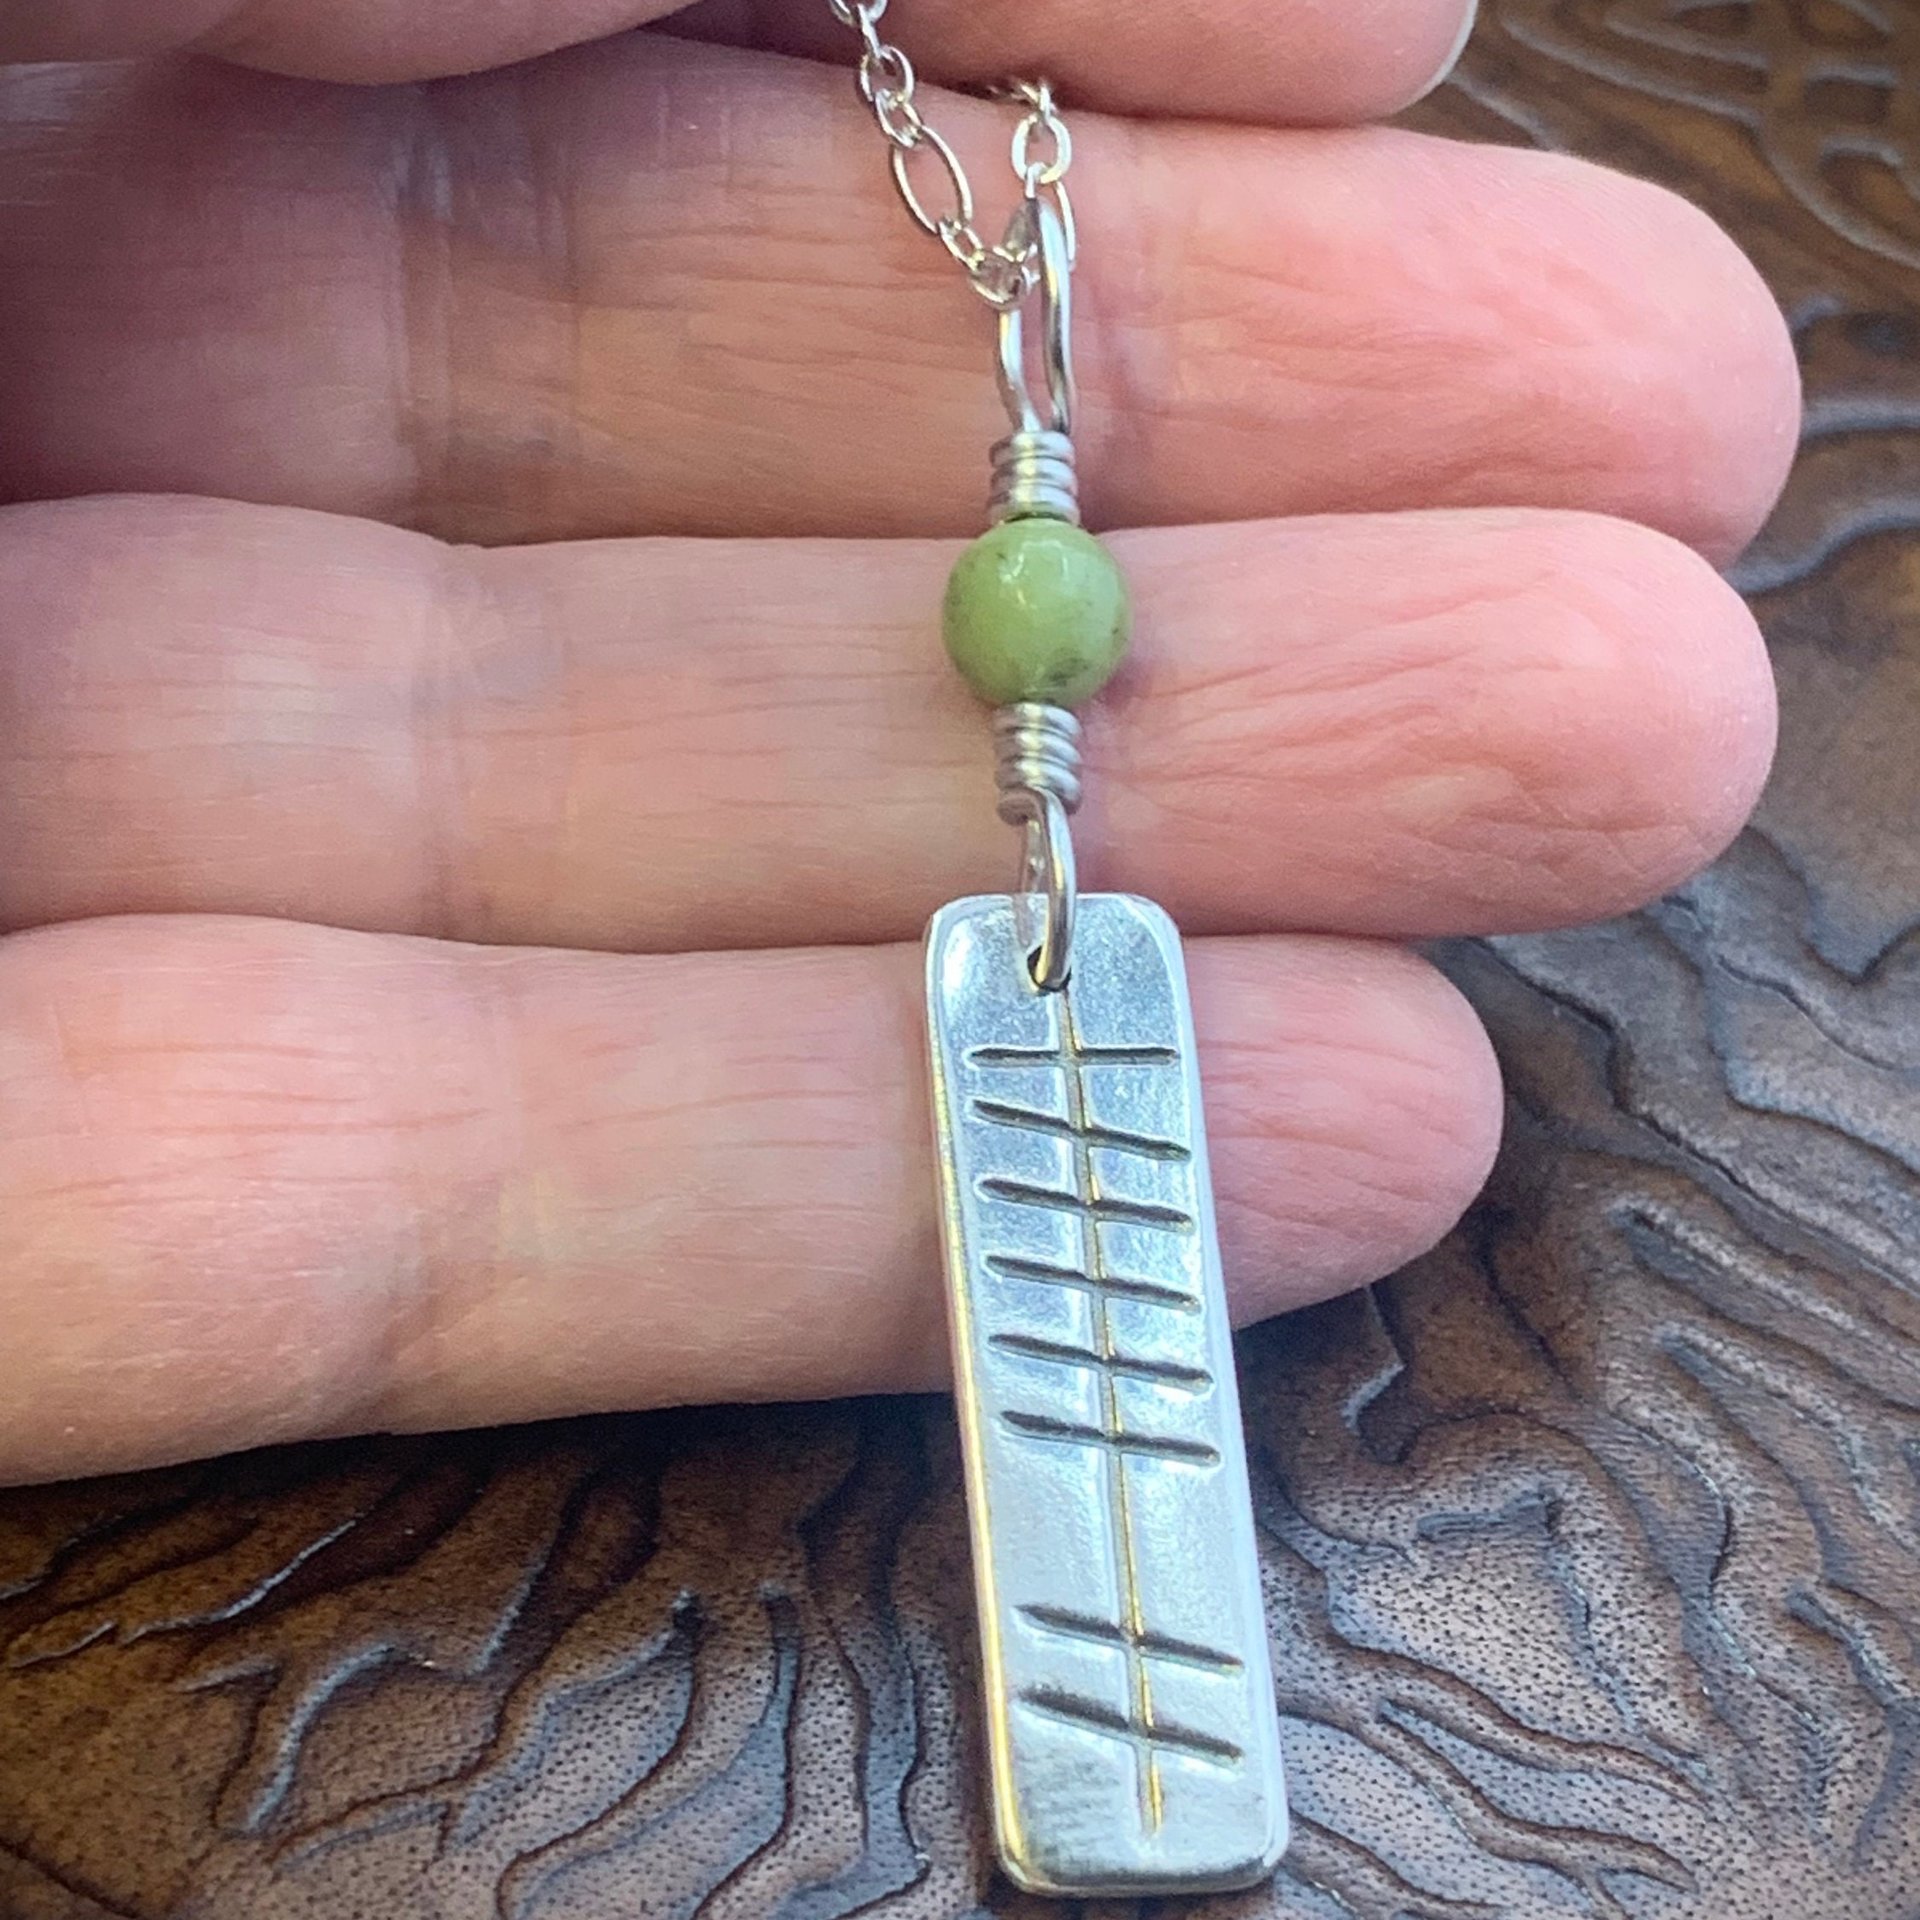 Grá Ogham Necklace, Love Bar Charm, Sterling Silver, Connemara Marble, Irish Celtic Jewelry, Hand Carved, Love Friend Gifts, Art Jewelry